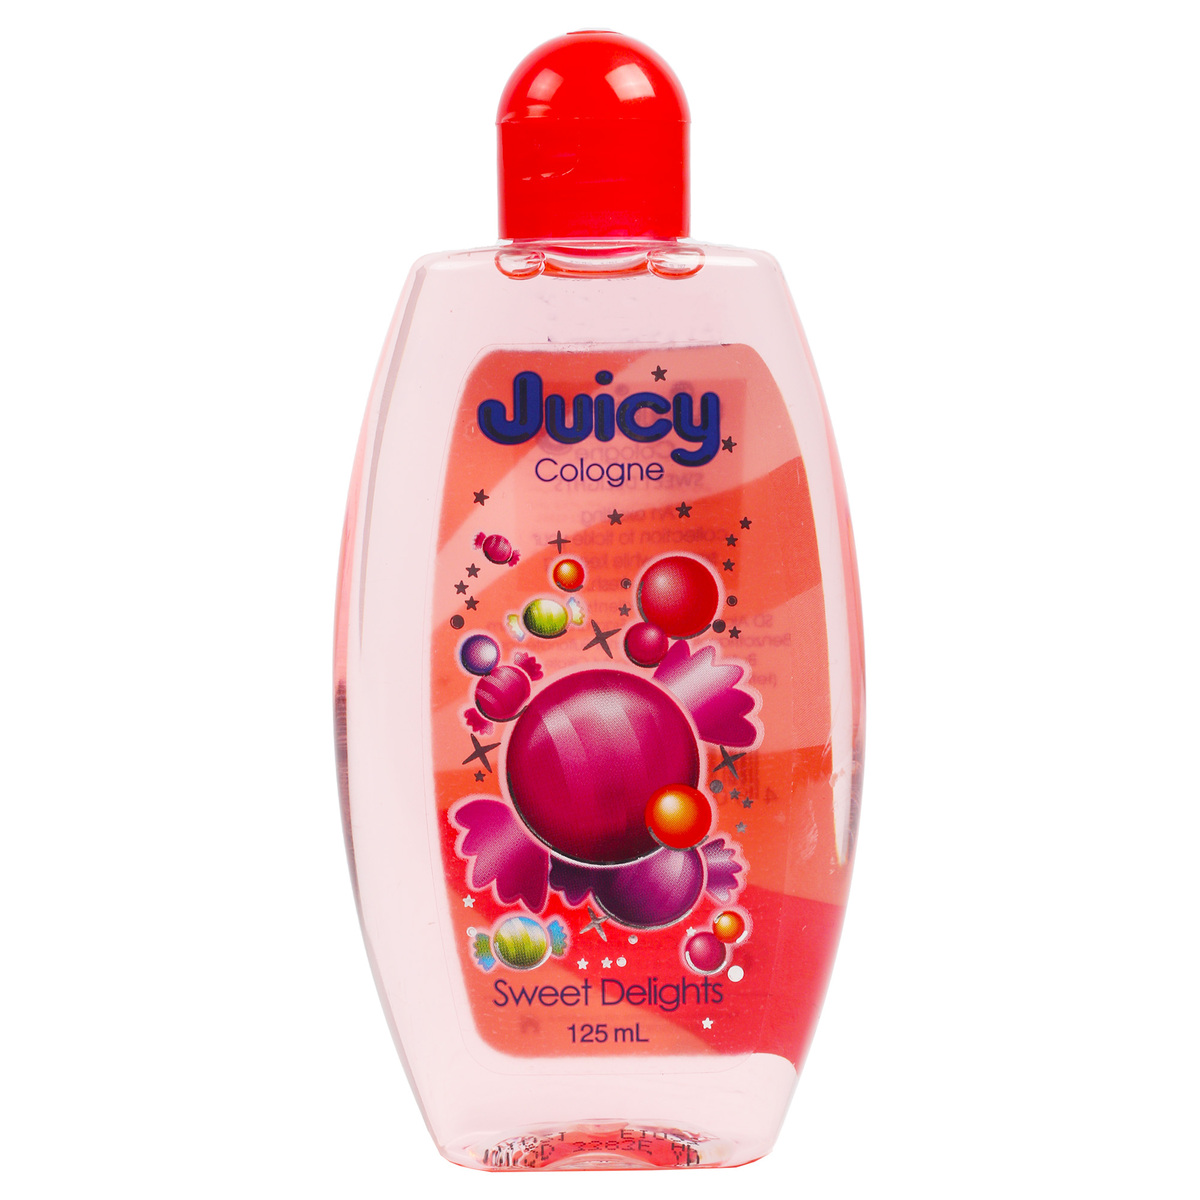 Juicy Cologne Sweet Delights 125 ml